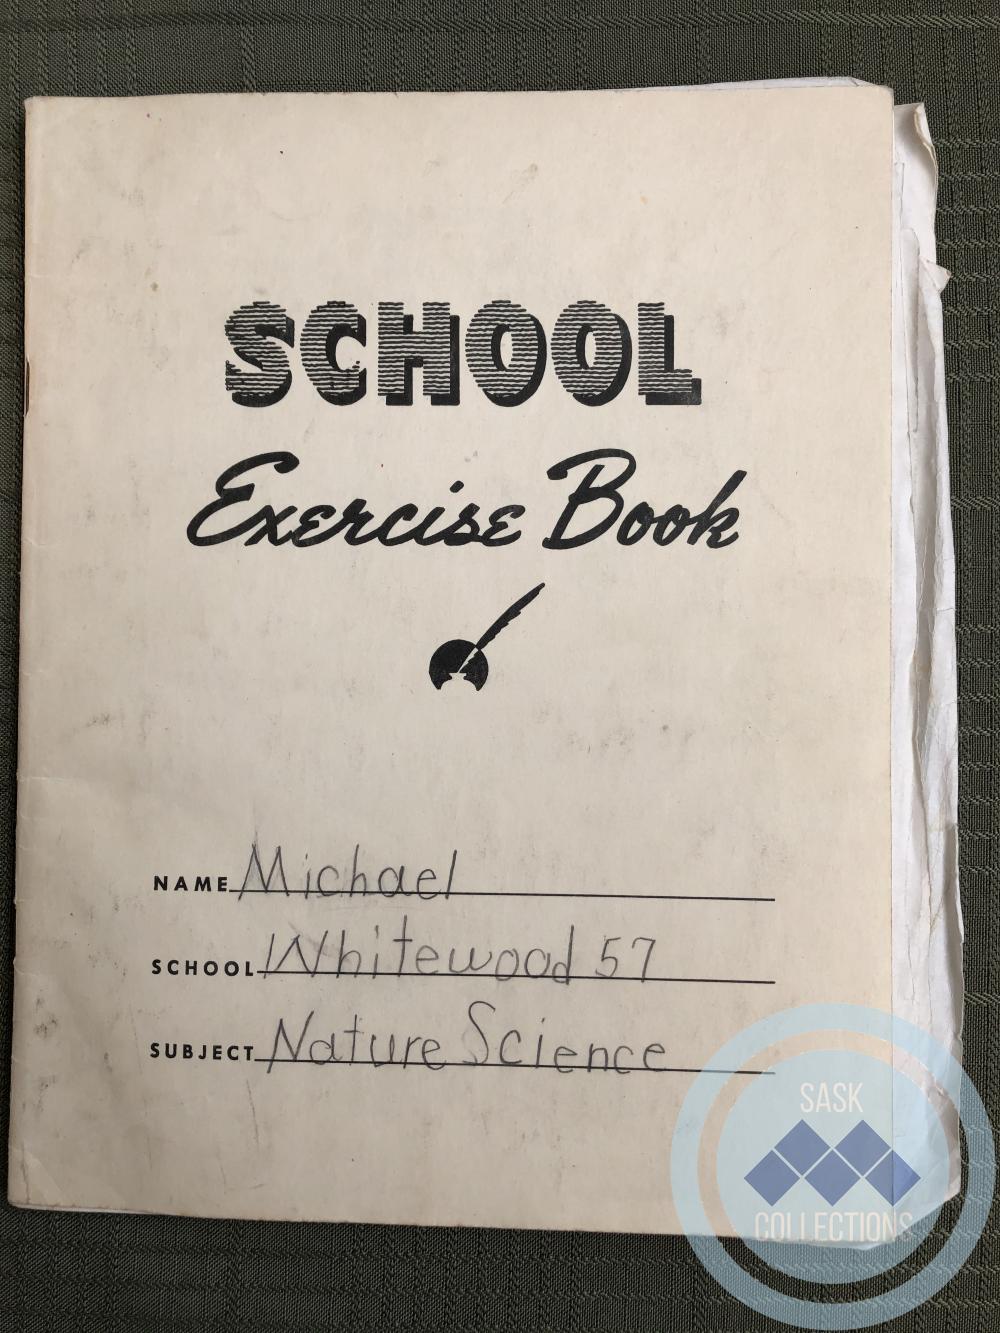 Exercise Book - Nature Science